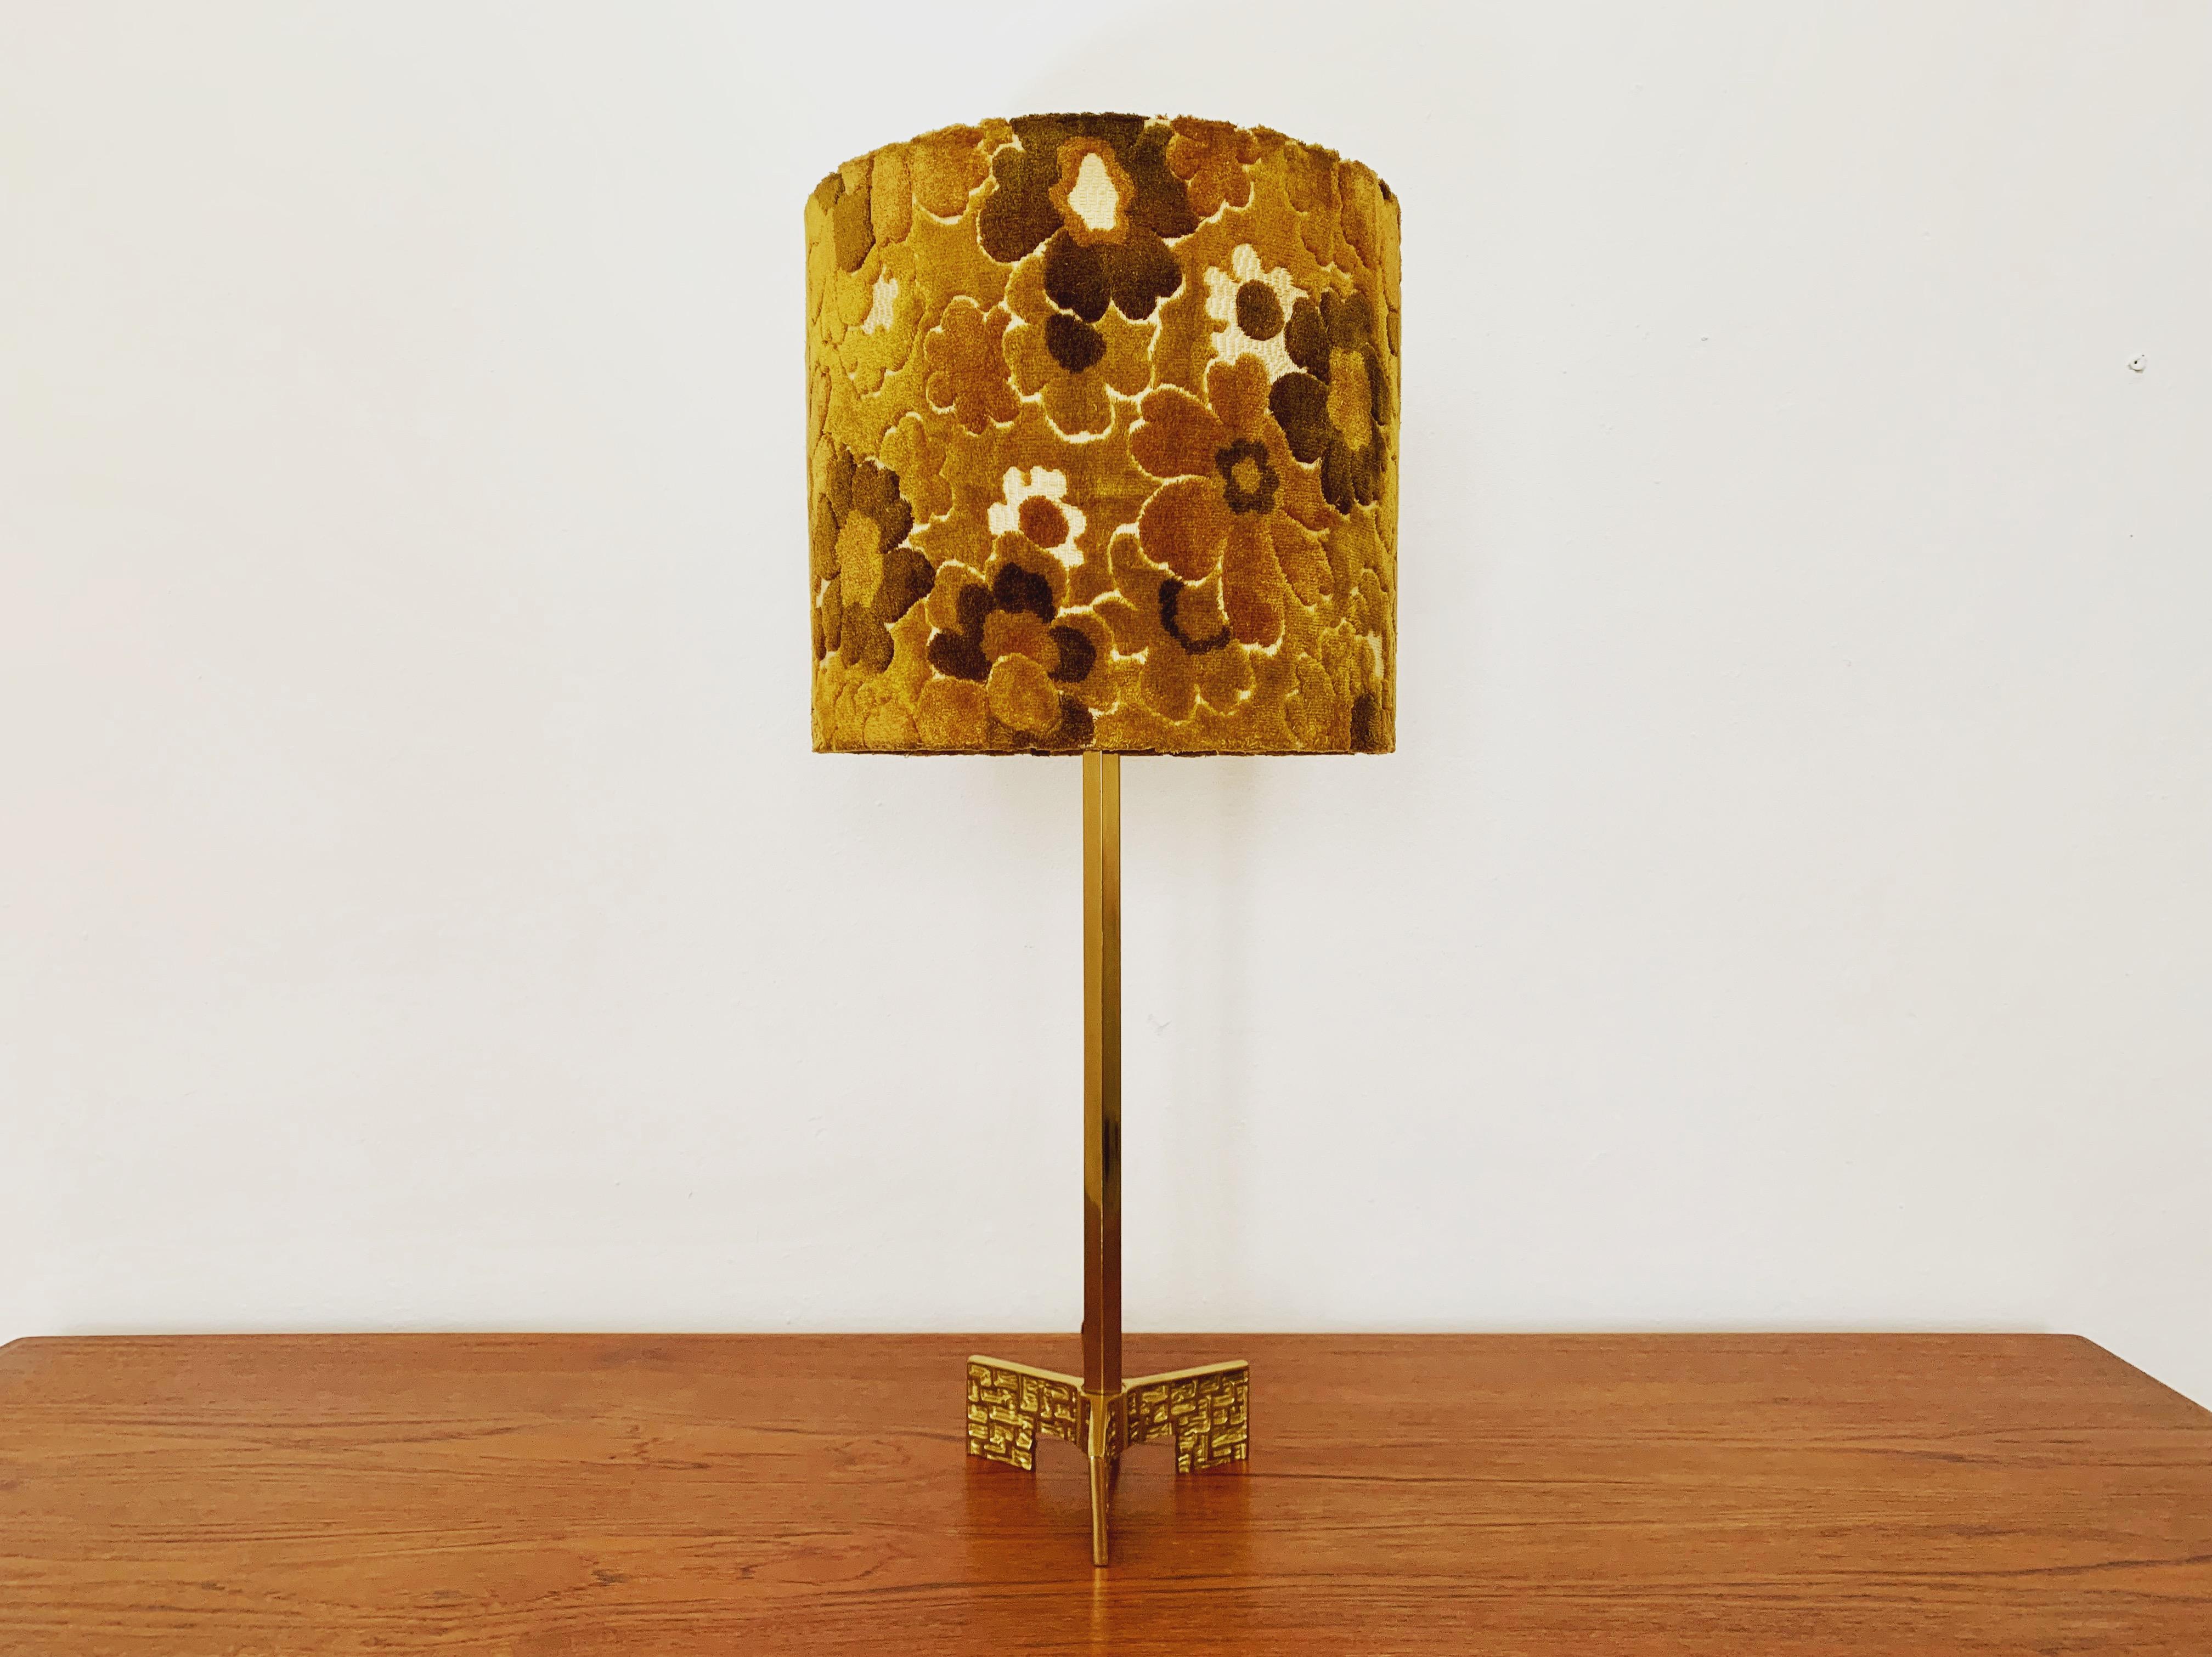 Impressive beautiful table lamp from the 1960s.
Beautiful brutalist details and an asset to any home.
The lampshade with the floral pattern is a real eye-catcher and spreads a very warm light.

The integrated pull switch has 3 switching